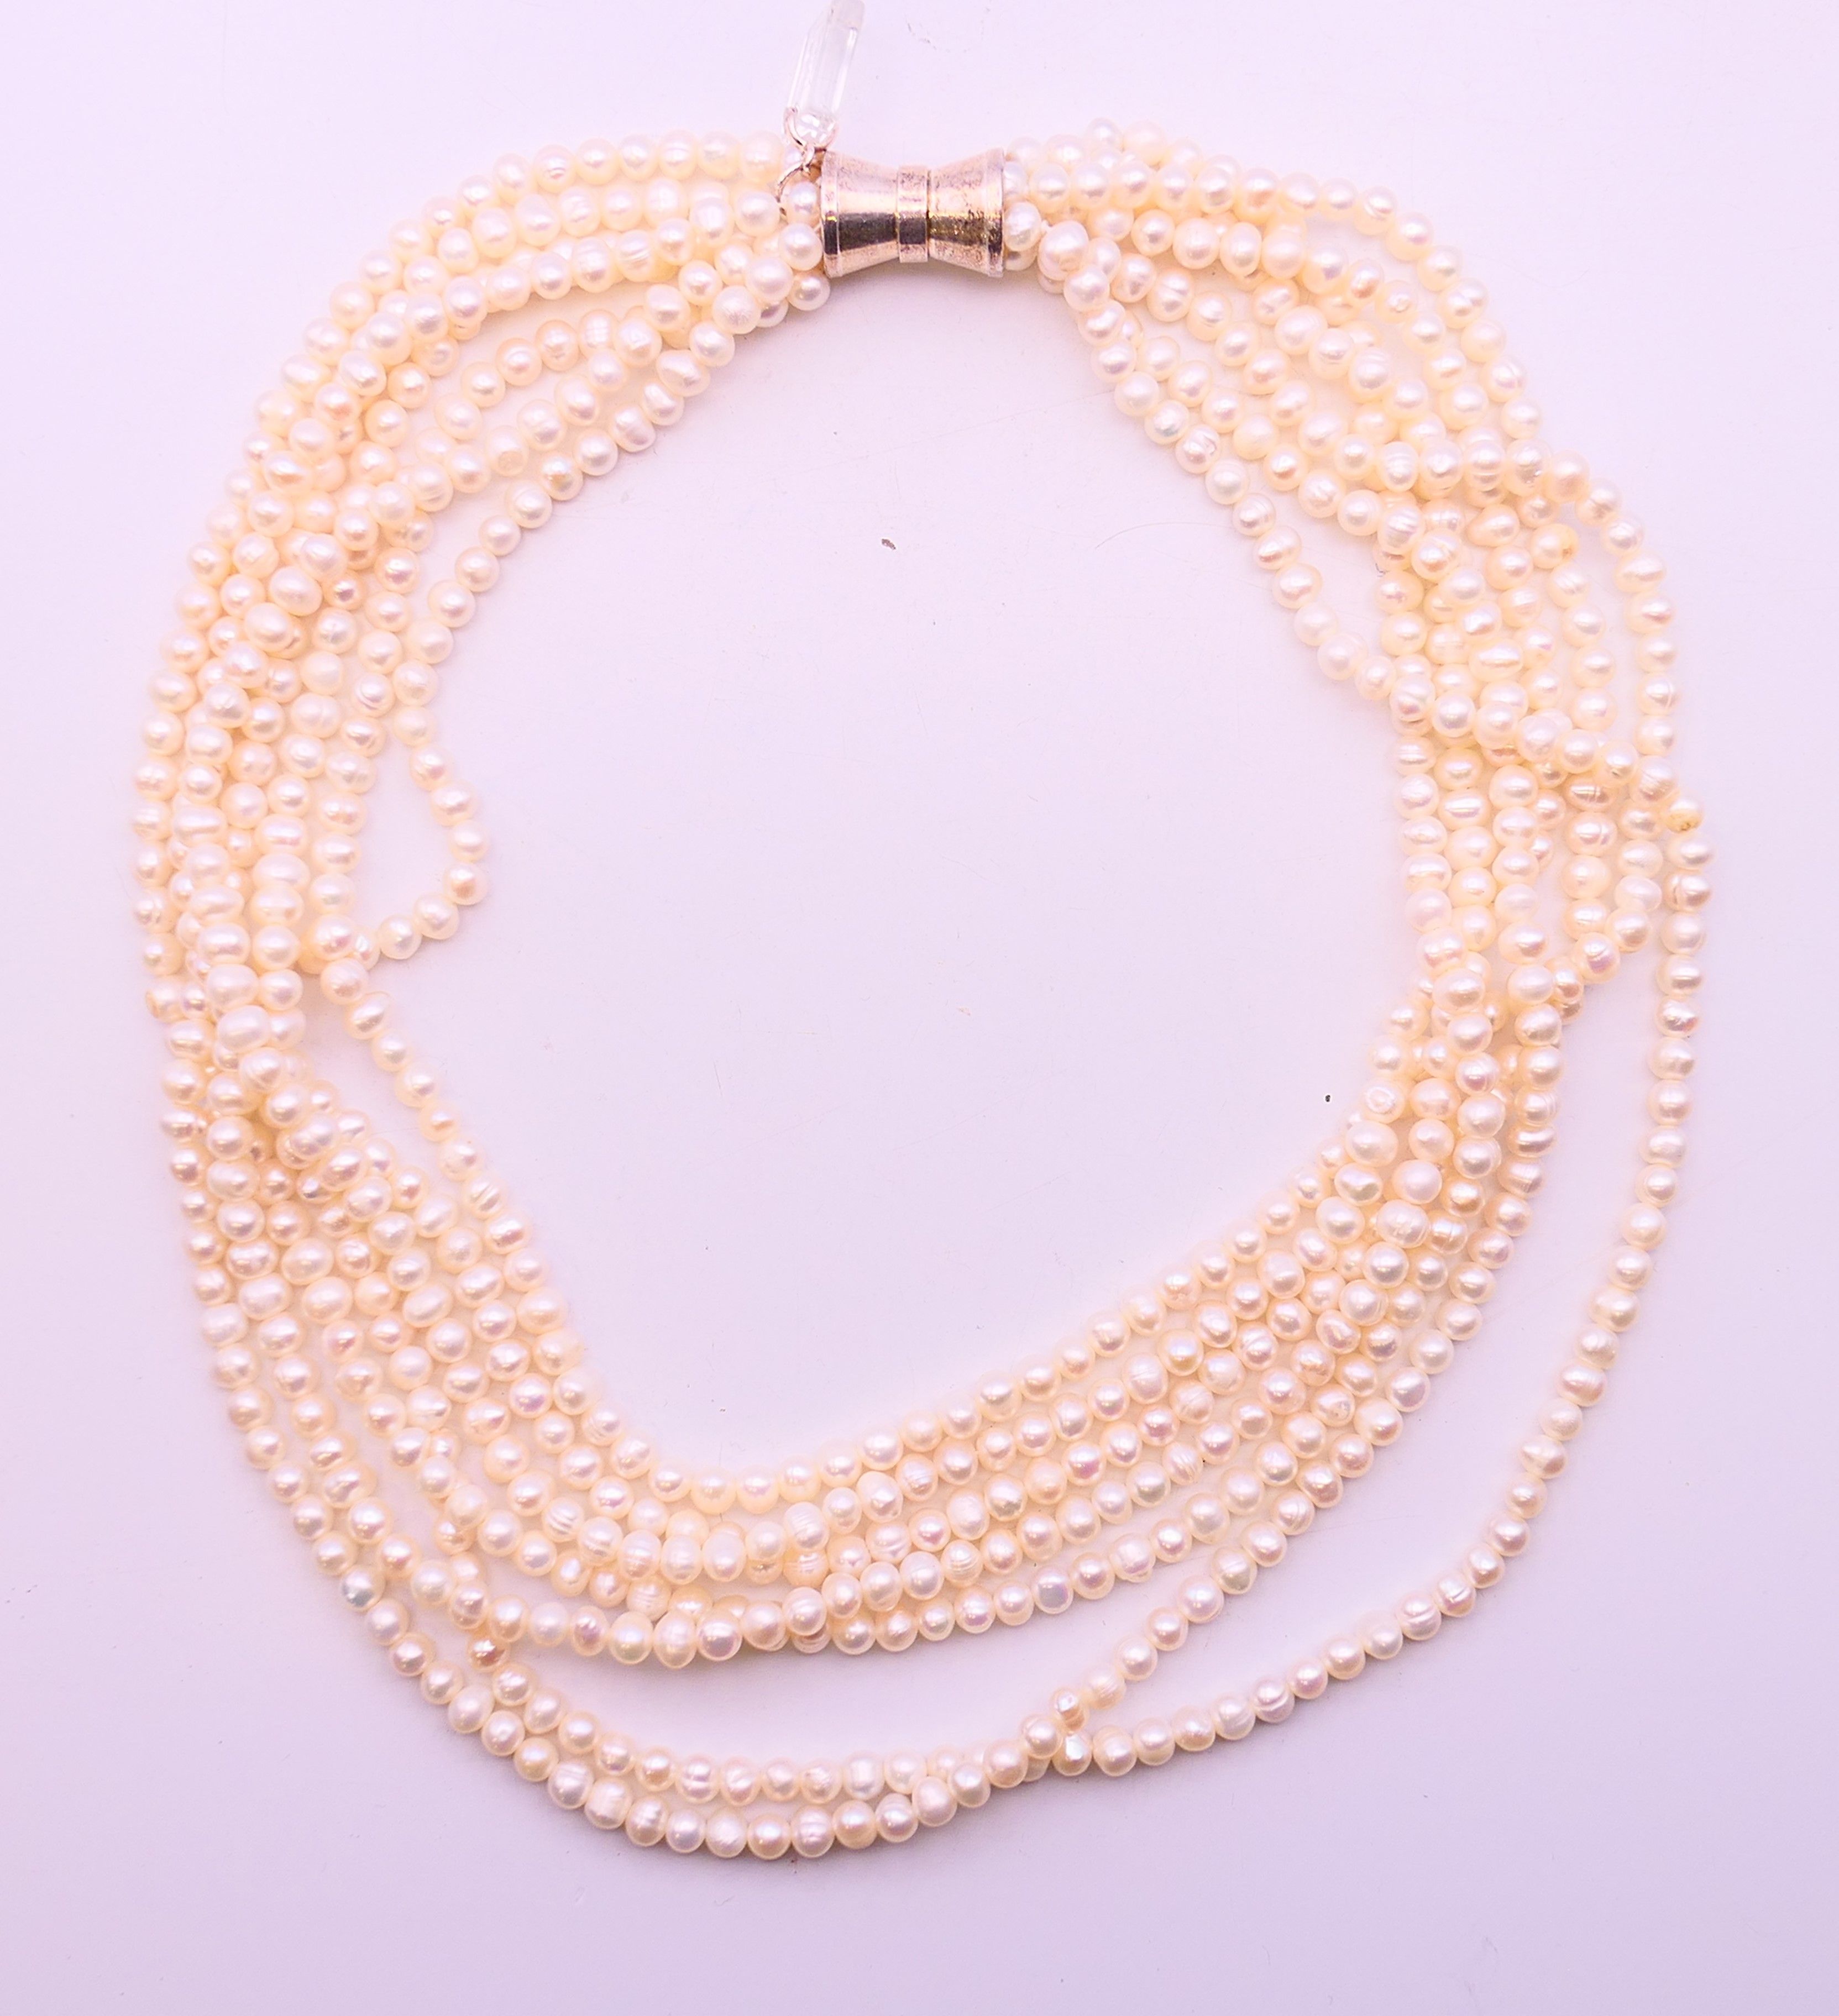 An Aska six-string pearl necklace. Approximately 46 cm long.